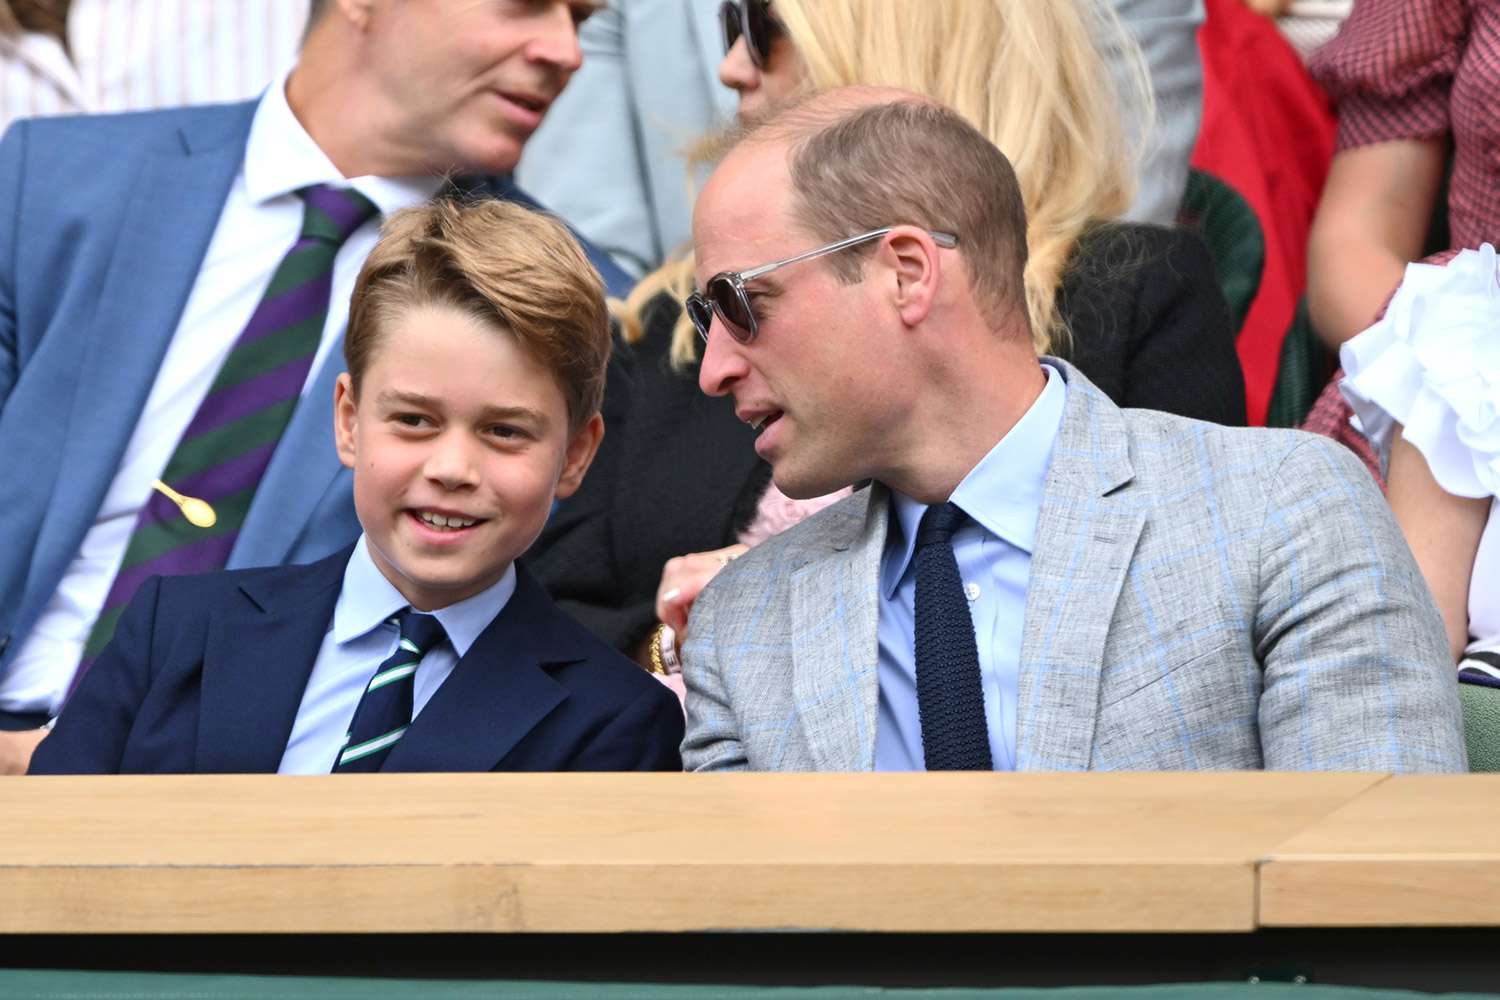 Prince William Hints at How Prince George May Follow in His and Prince Harry's Footsteps